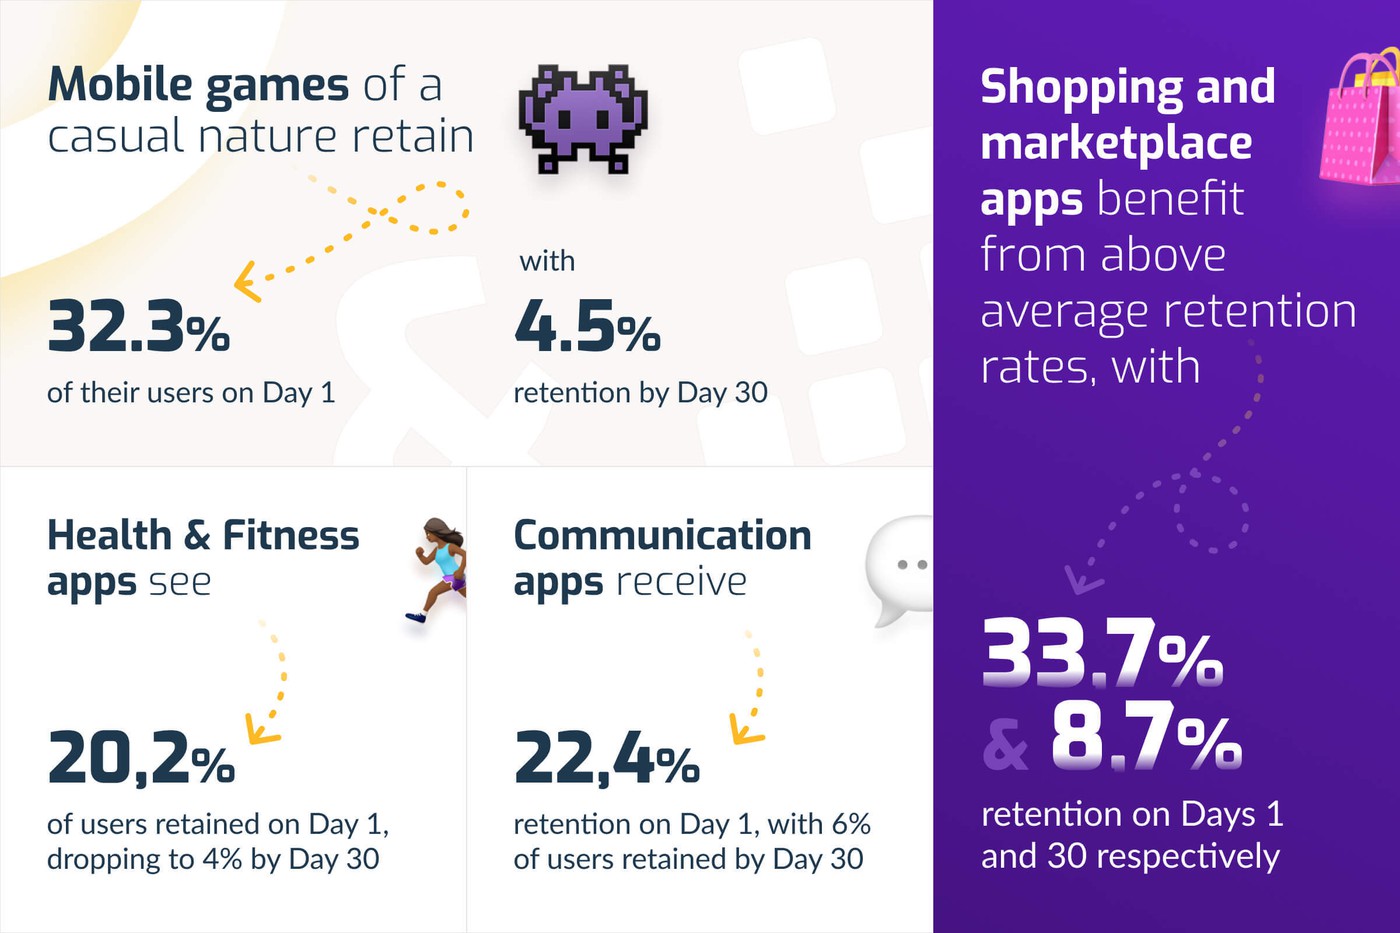 what is a good app retention rate for day 1 and day 30?